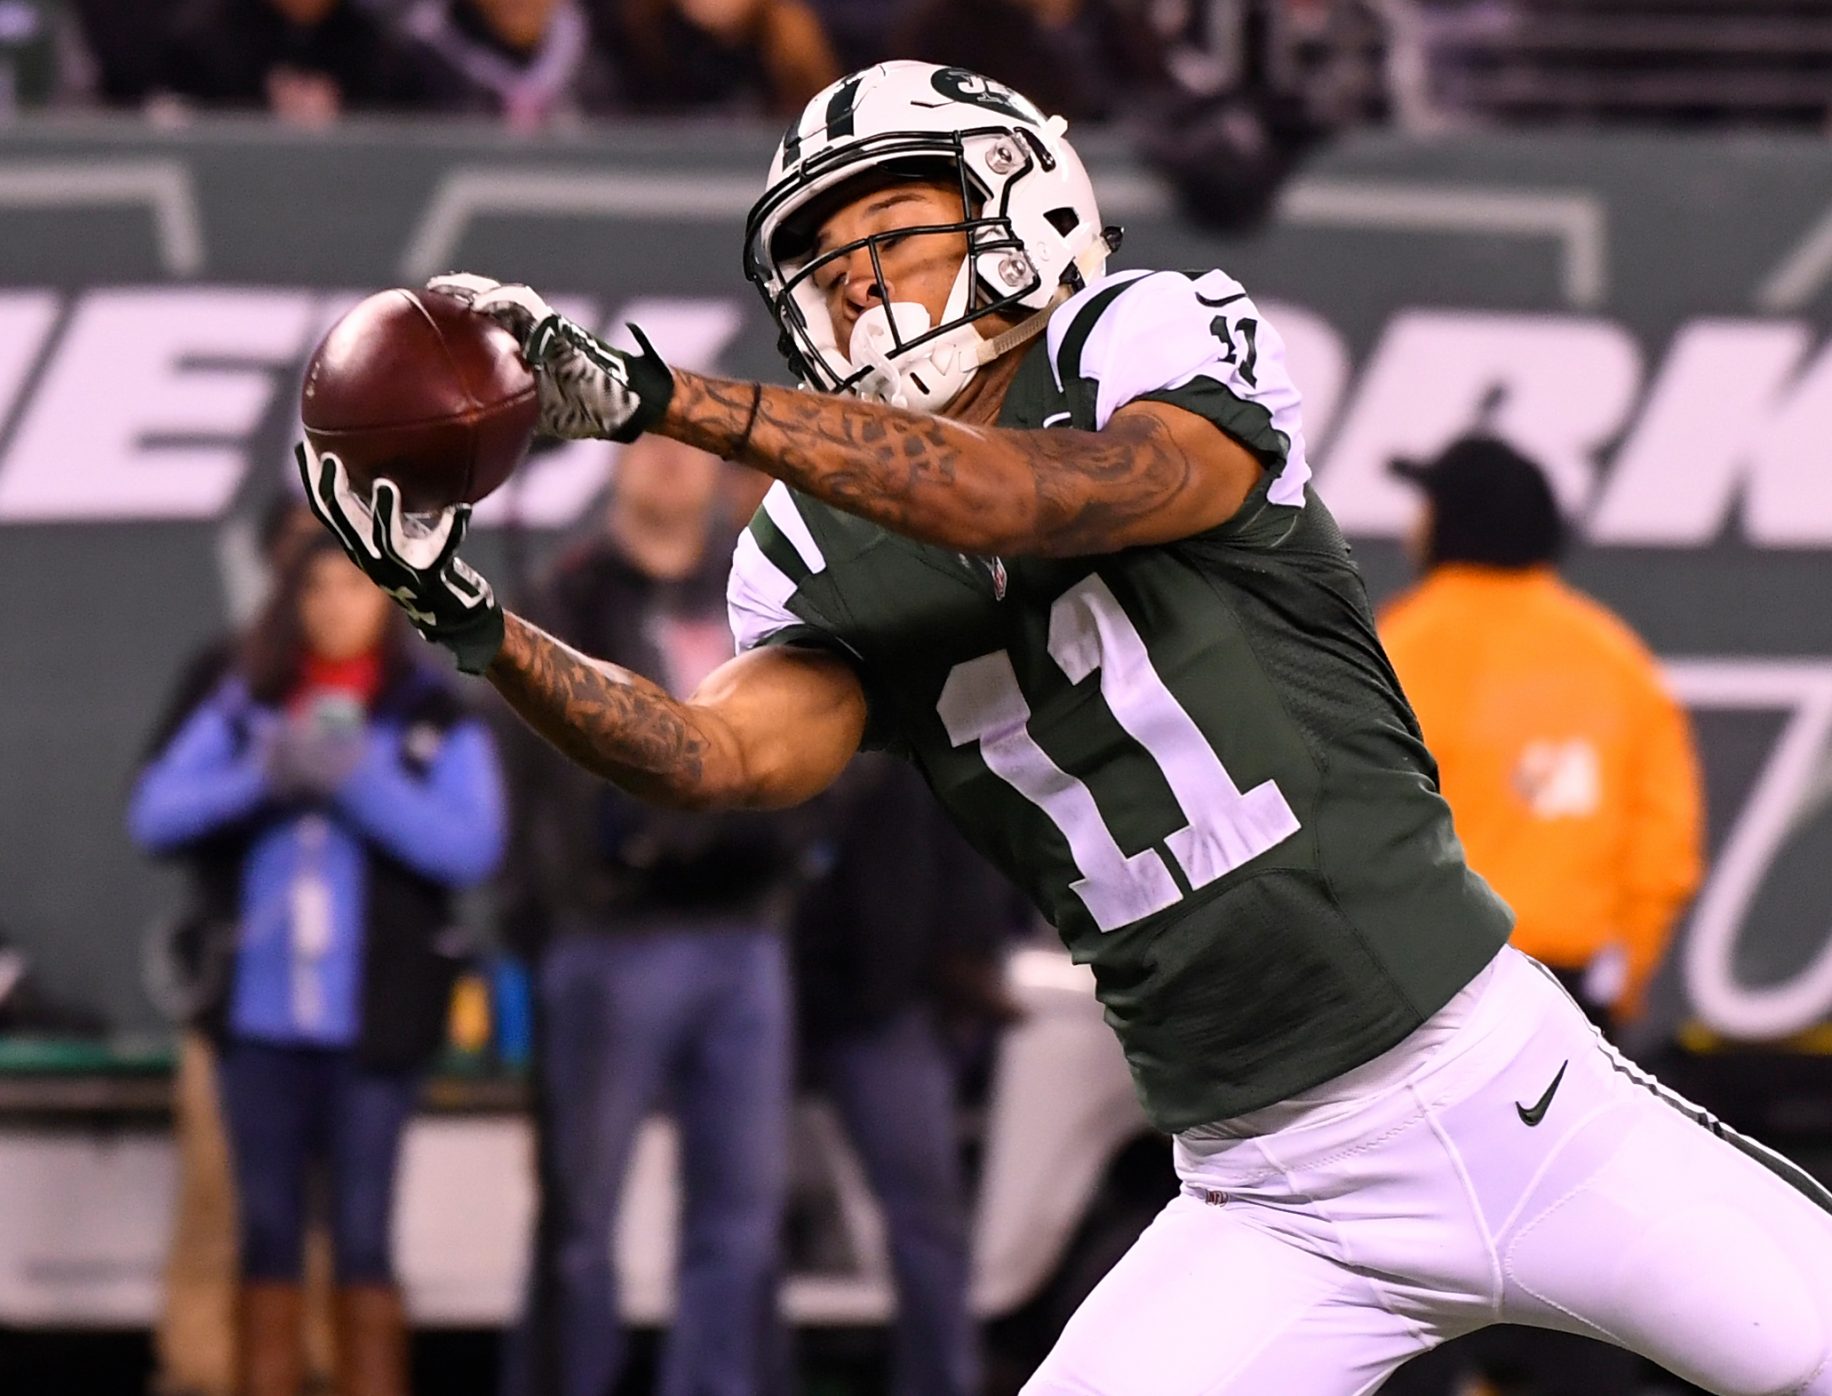 New York Jets: Robby Anderson Trouble Opens Up Door for Others 